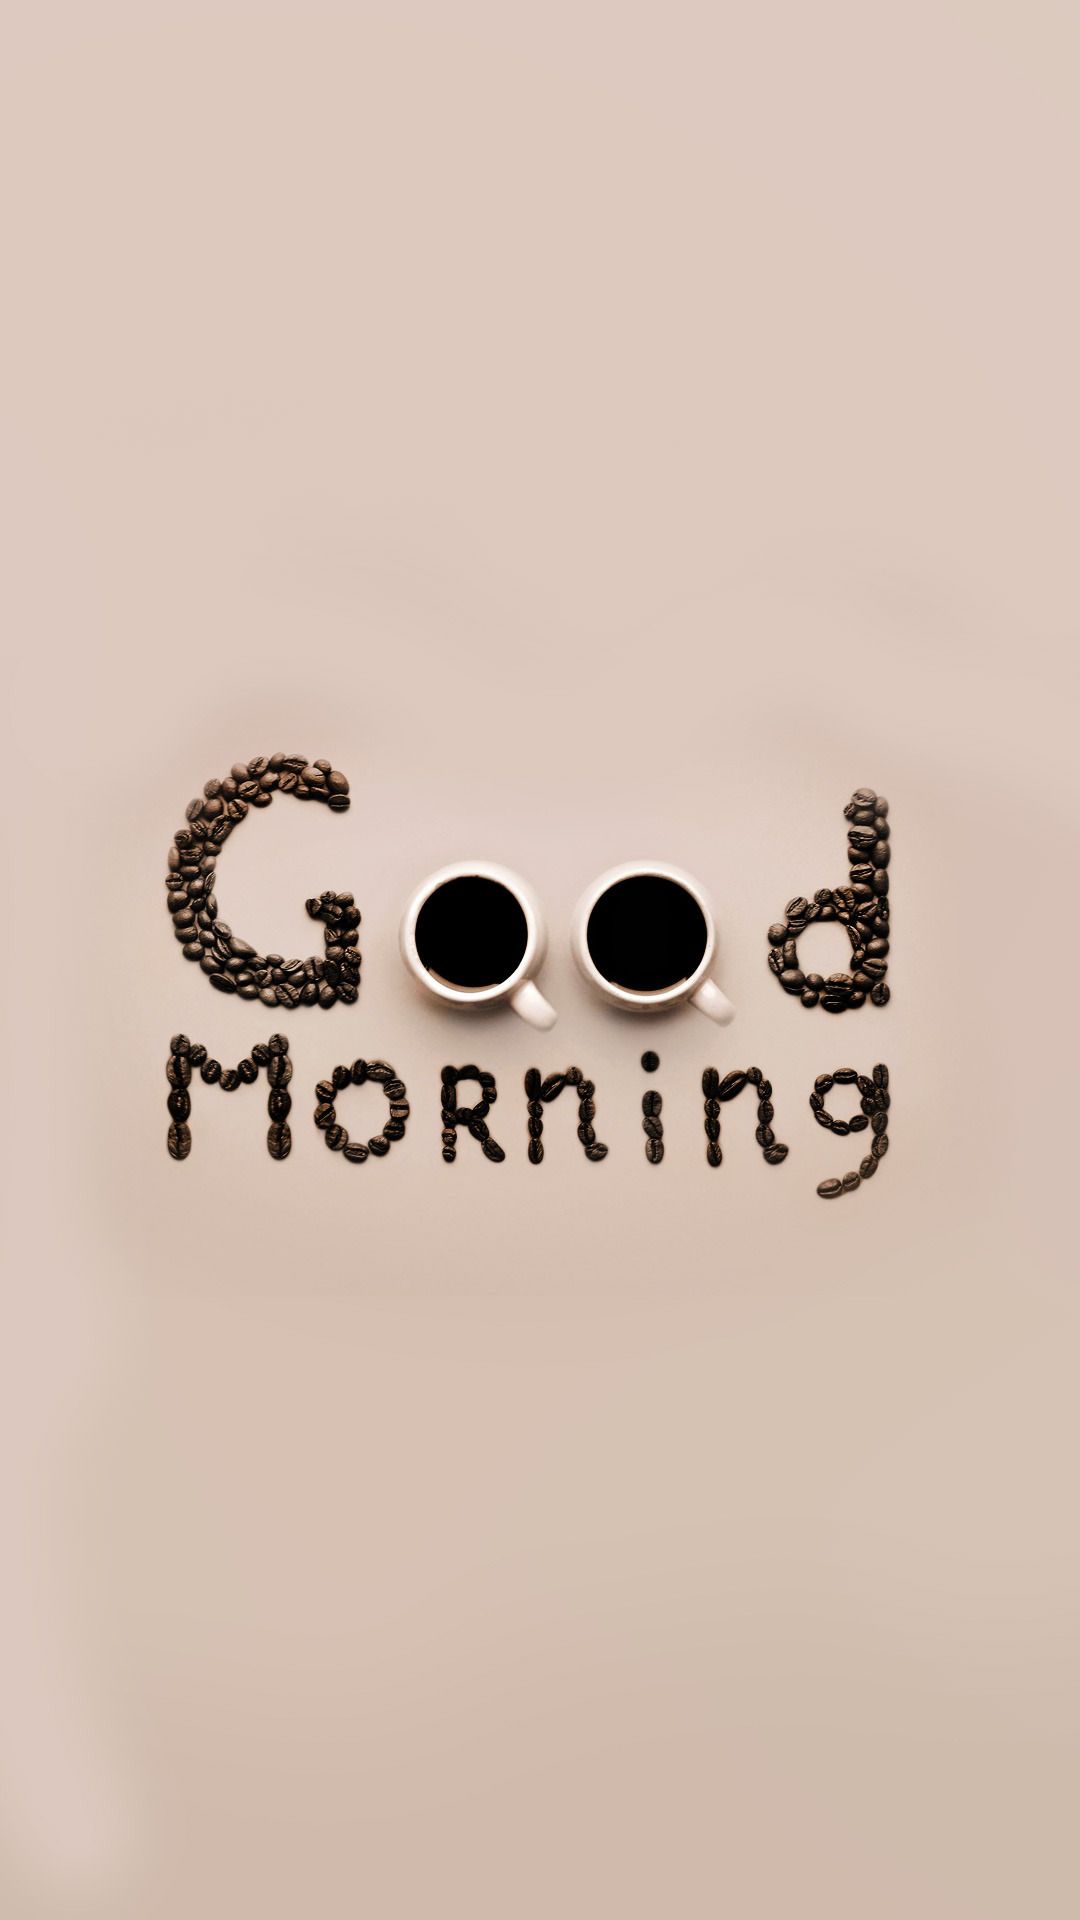 Typography iPhone Wallpaper Download For Free. Best espresso, Good morning coffee, Good morning facebook